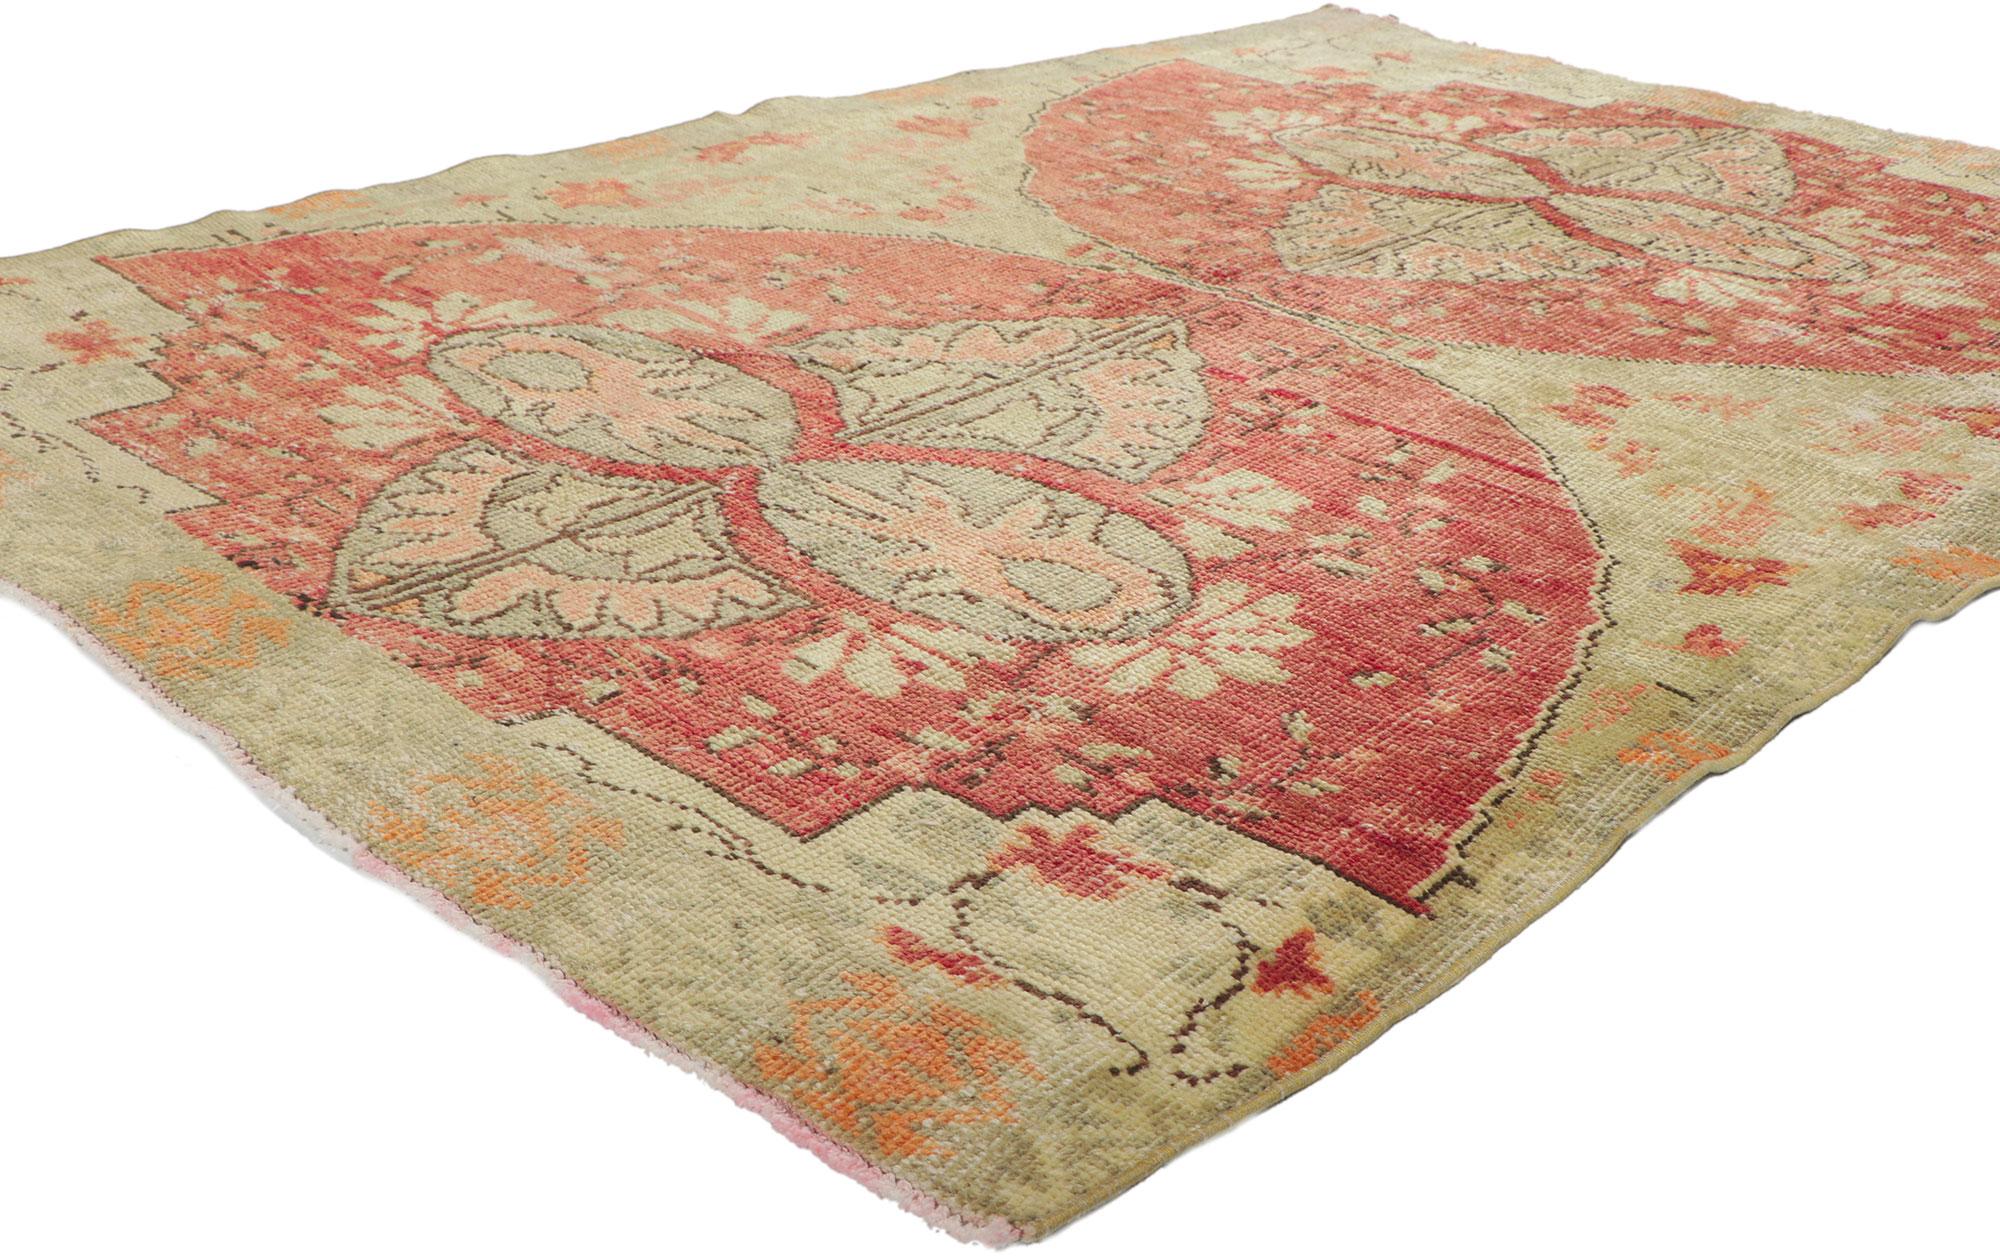 53150 Rustic Vintage Turkish Oushak Rug, 04'07 x 06'08.
Effortless beauty and romantic connotations meet soft, bespoke vibes with a Swedish farmhouse cottage style in this hand knotted wool distressed vintage Turkish Oushak rug. The lovingly